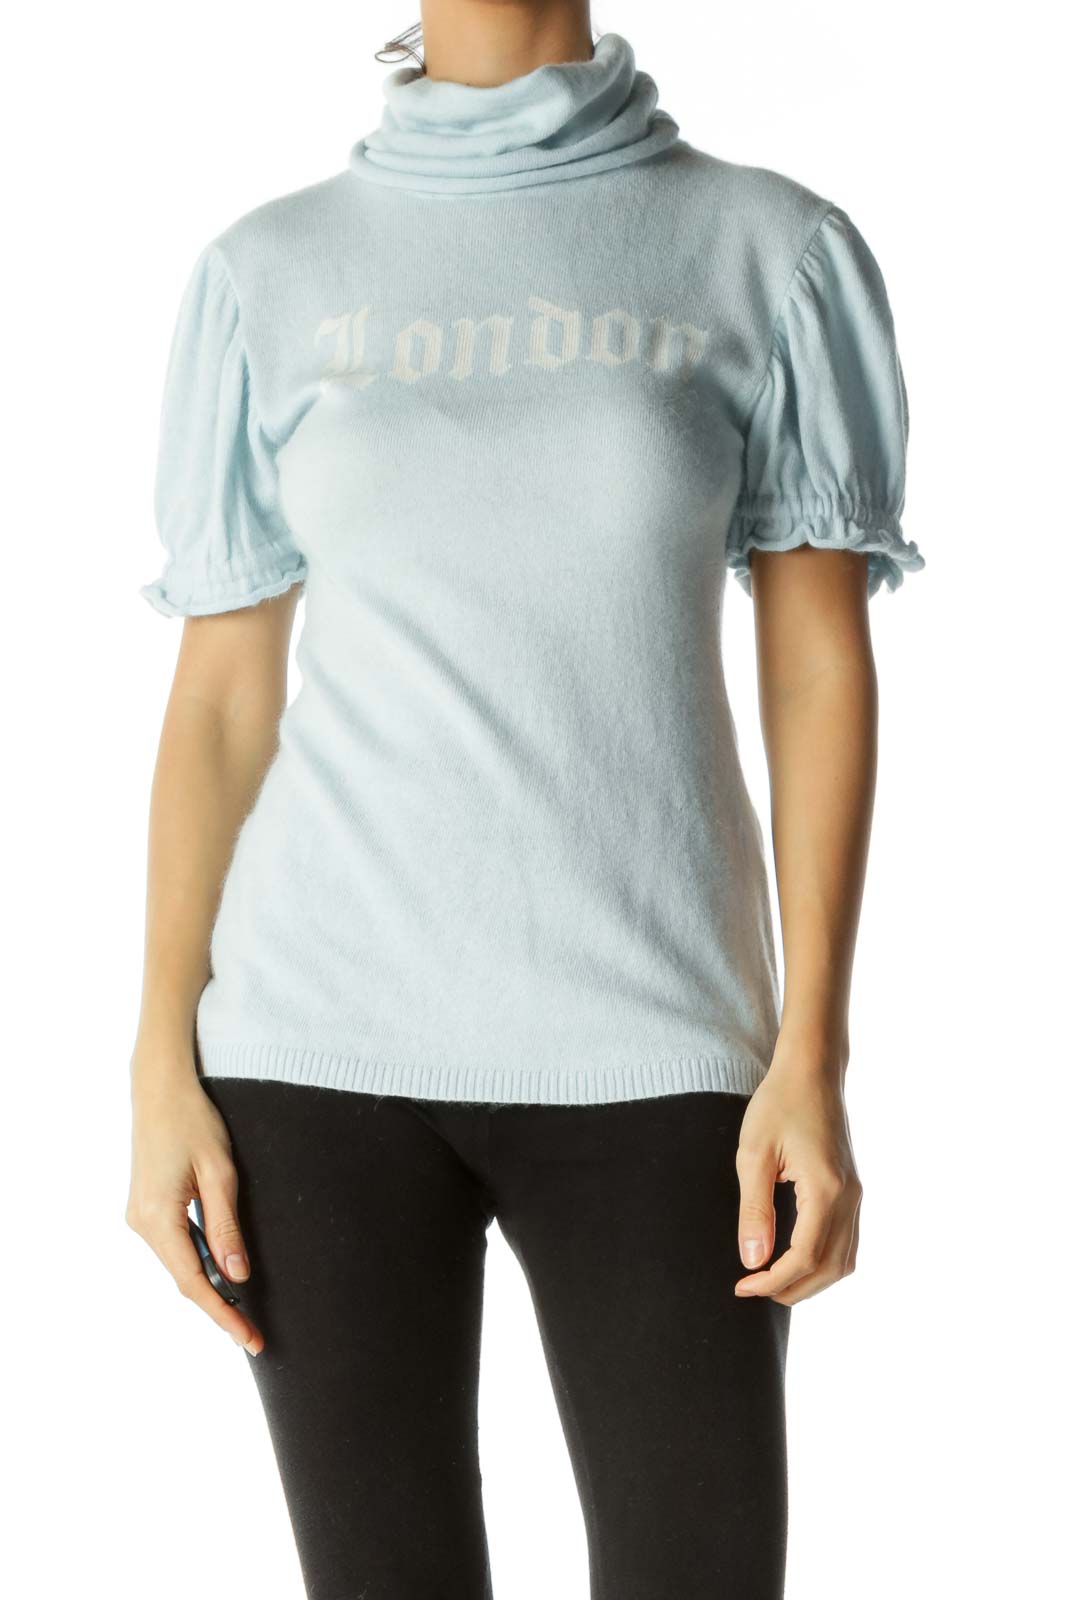 Blue White Turtle Neck Short Sleeve Graphic Knit Top Front